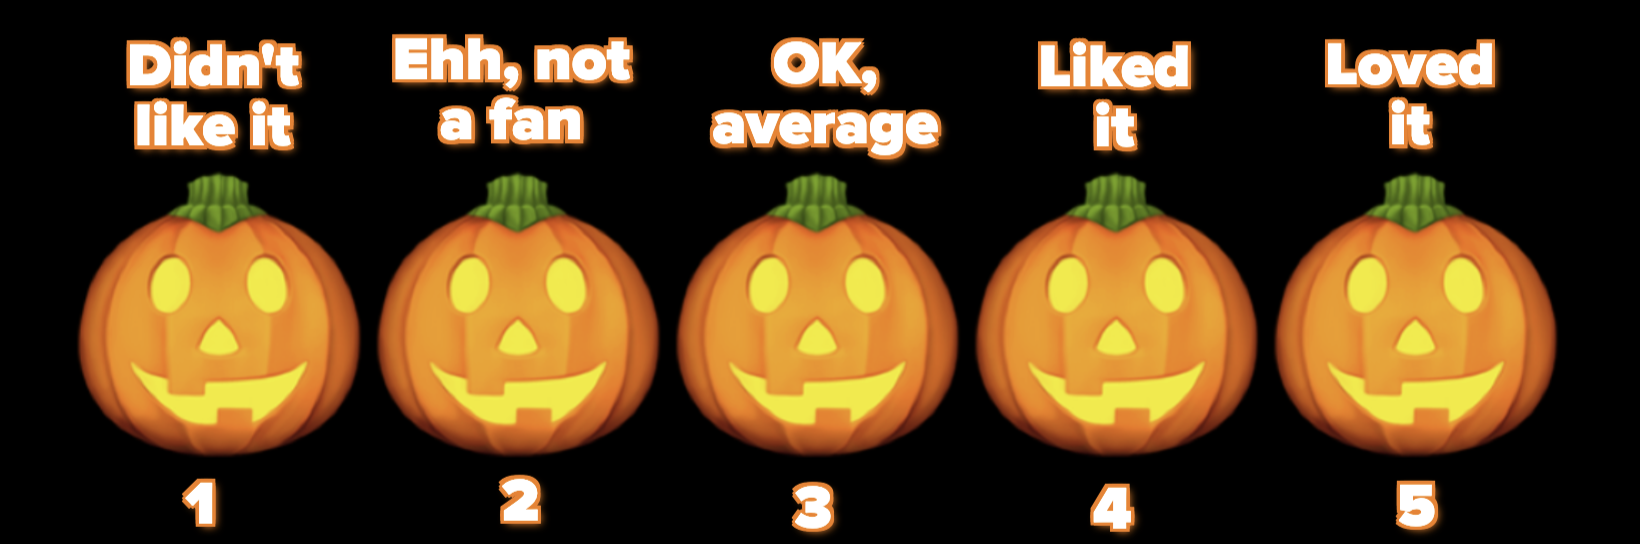 Graphic showing the pumpkin rating system